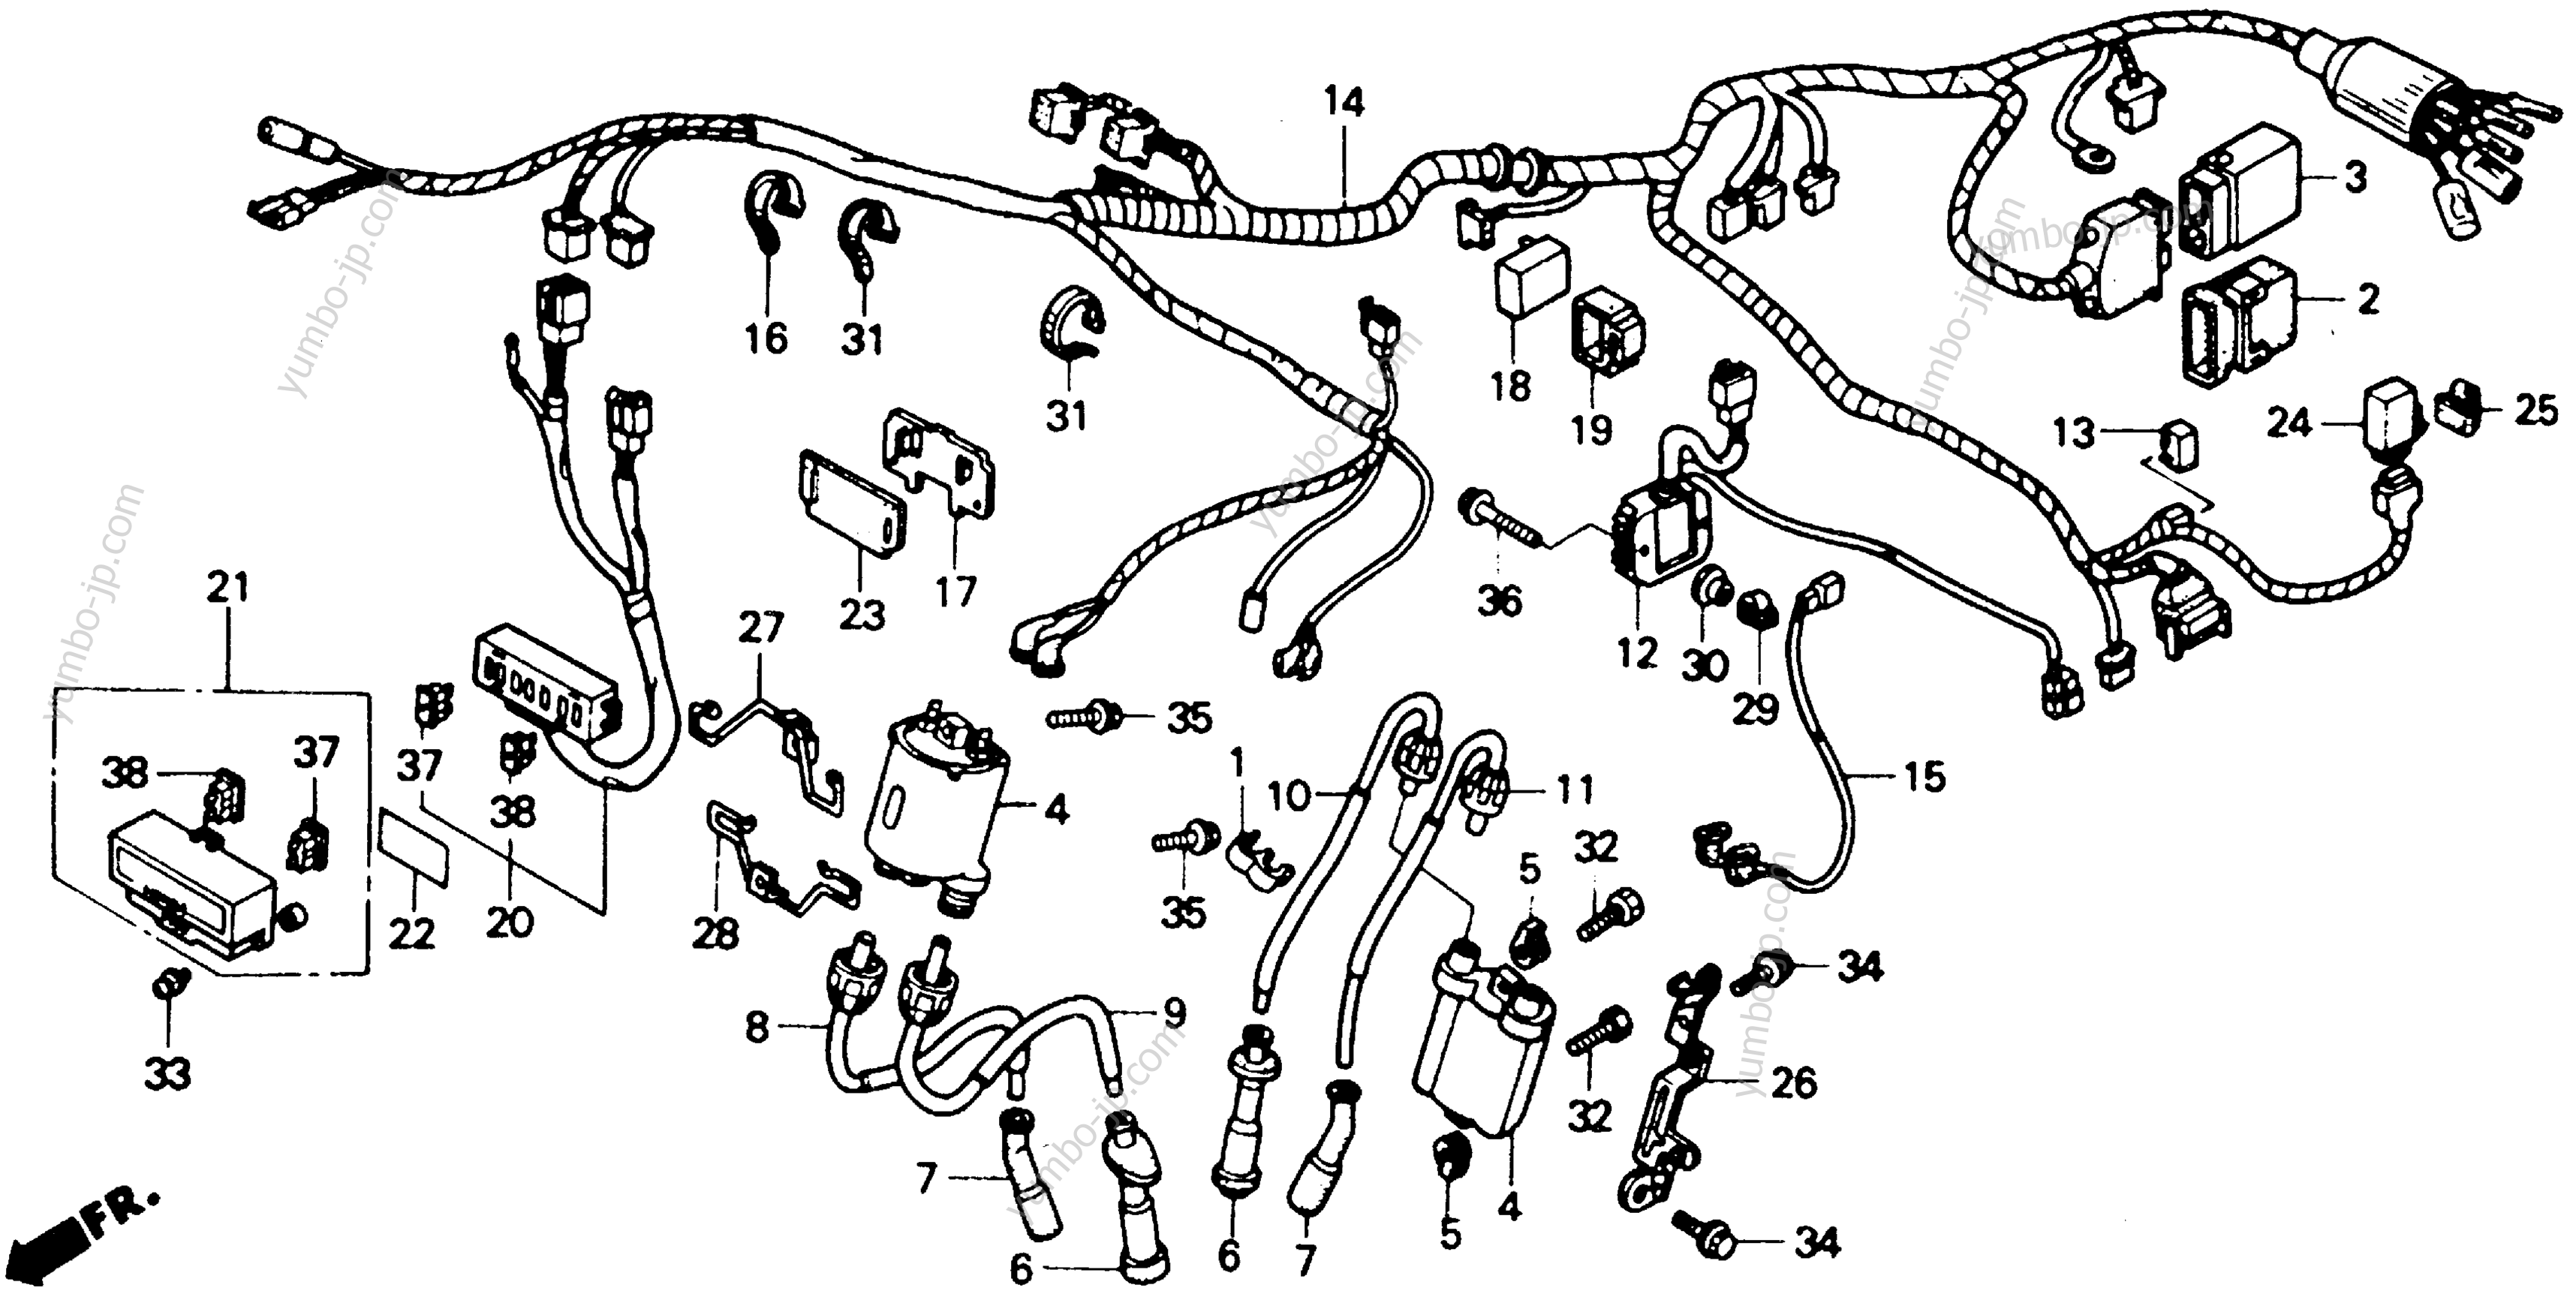 WIRE HARNESS for motorcycles HONDA NT650 AC 1990 year